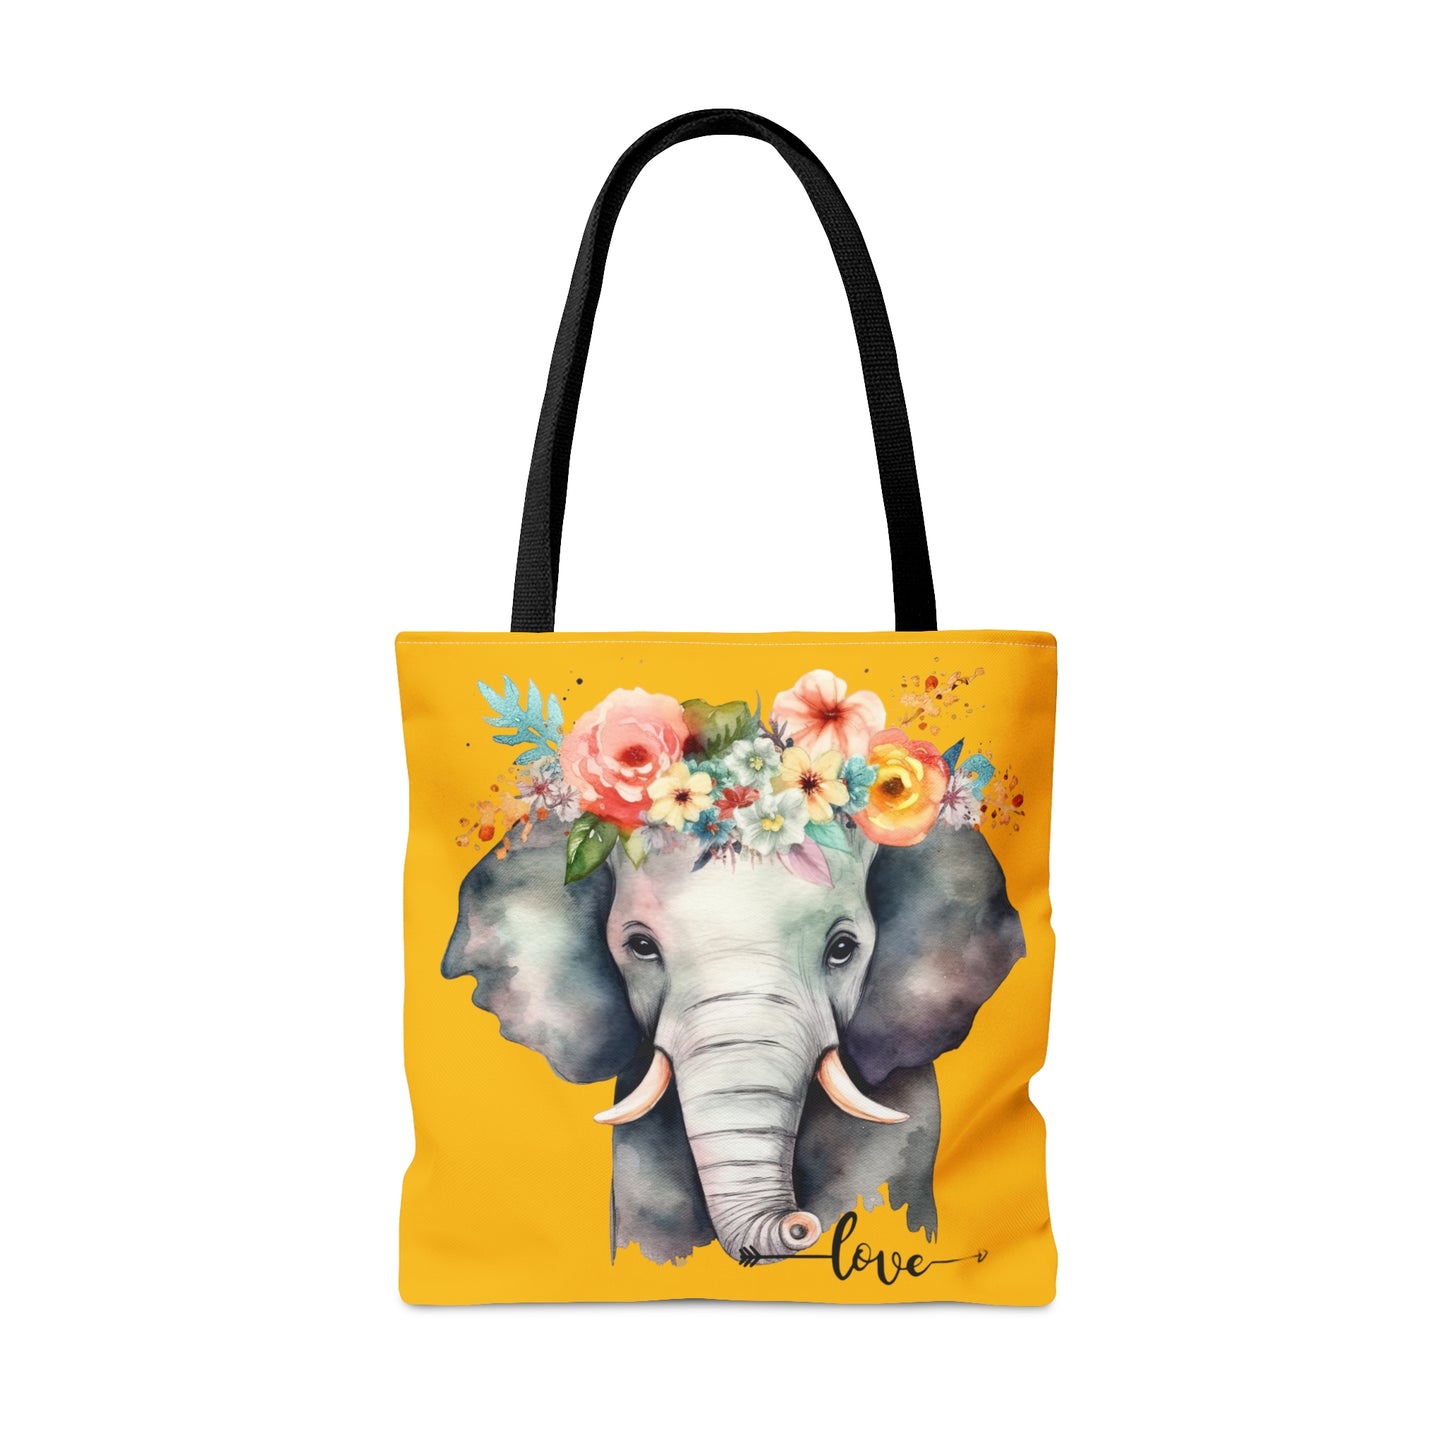 Cute mama elephant with flowers for a tiara on this tote bag. Come in 3 sizes to meet your needs.